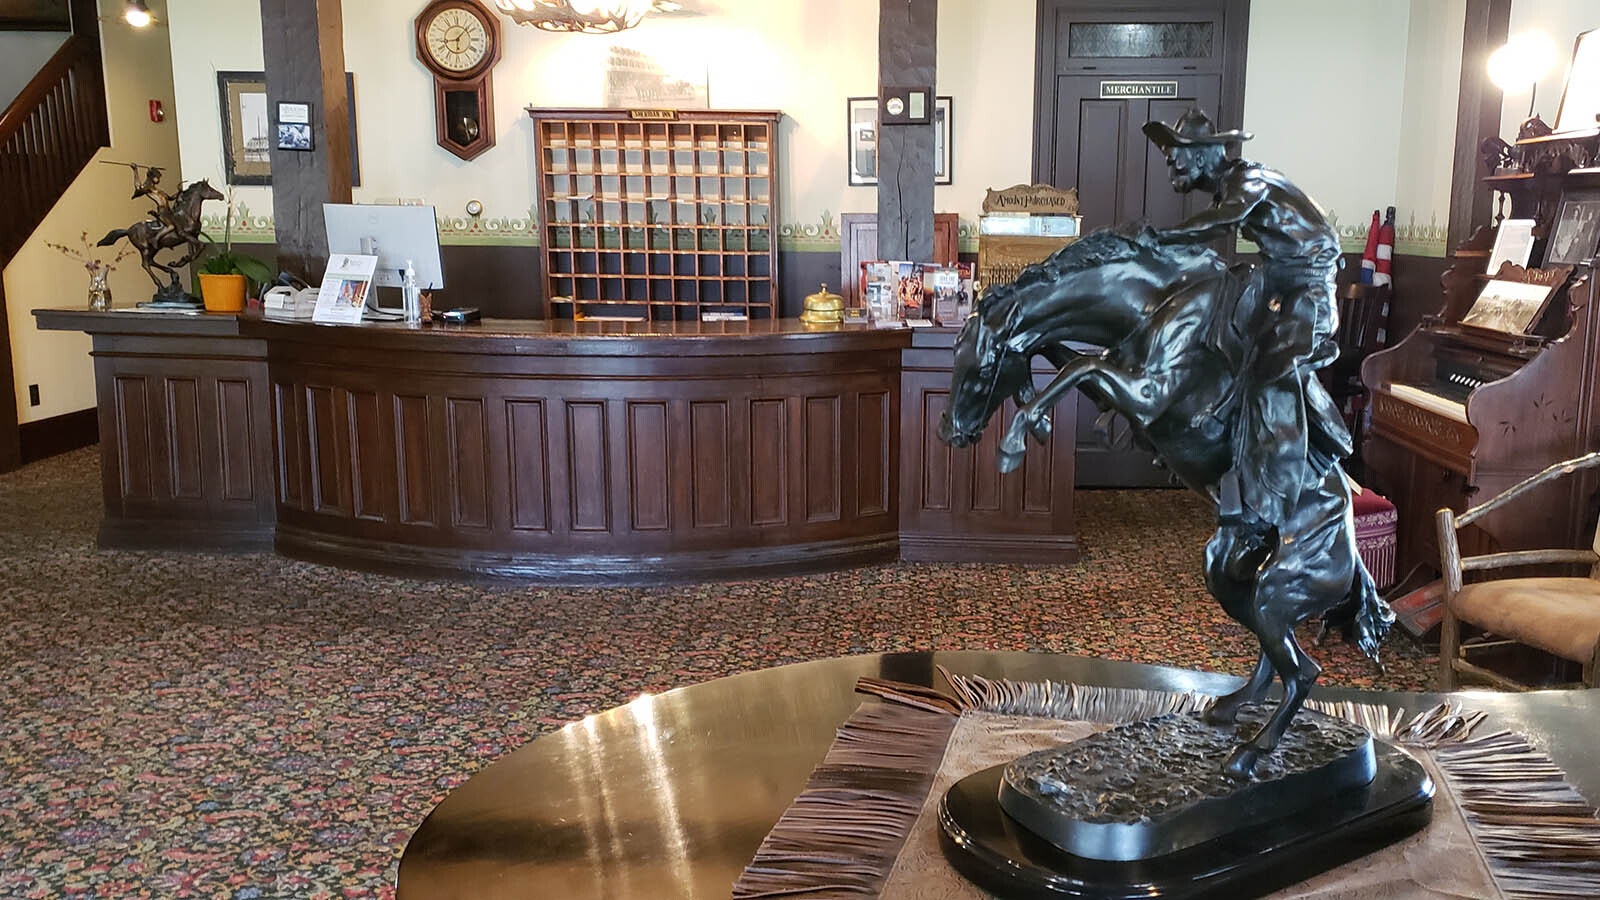 A galloping horse sits on the piano while behind the original desk and mailbox for the inn.